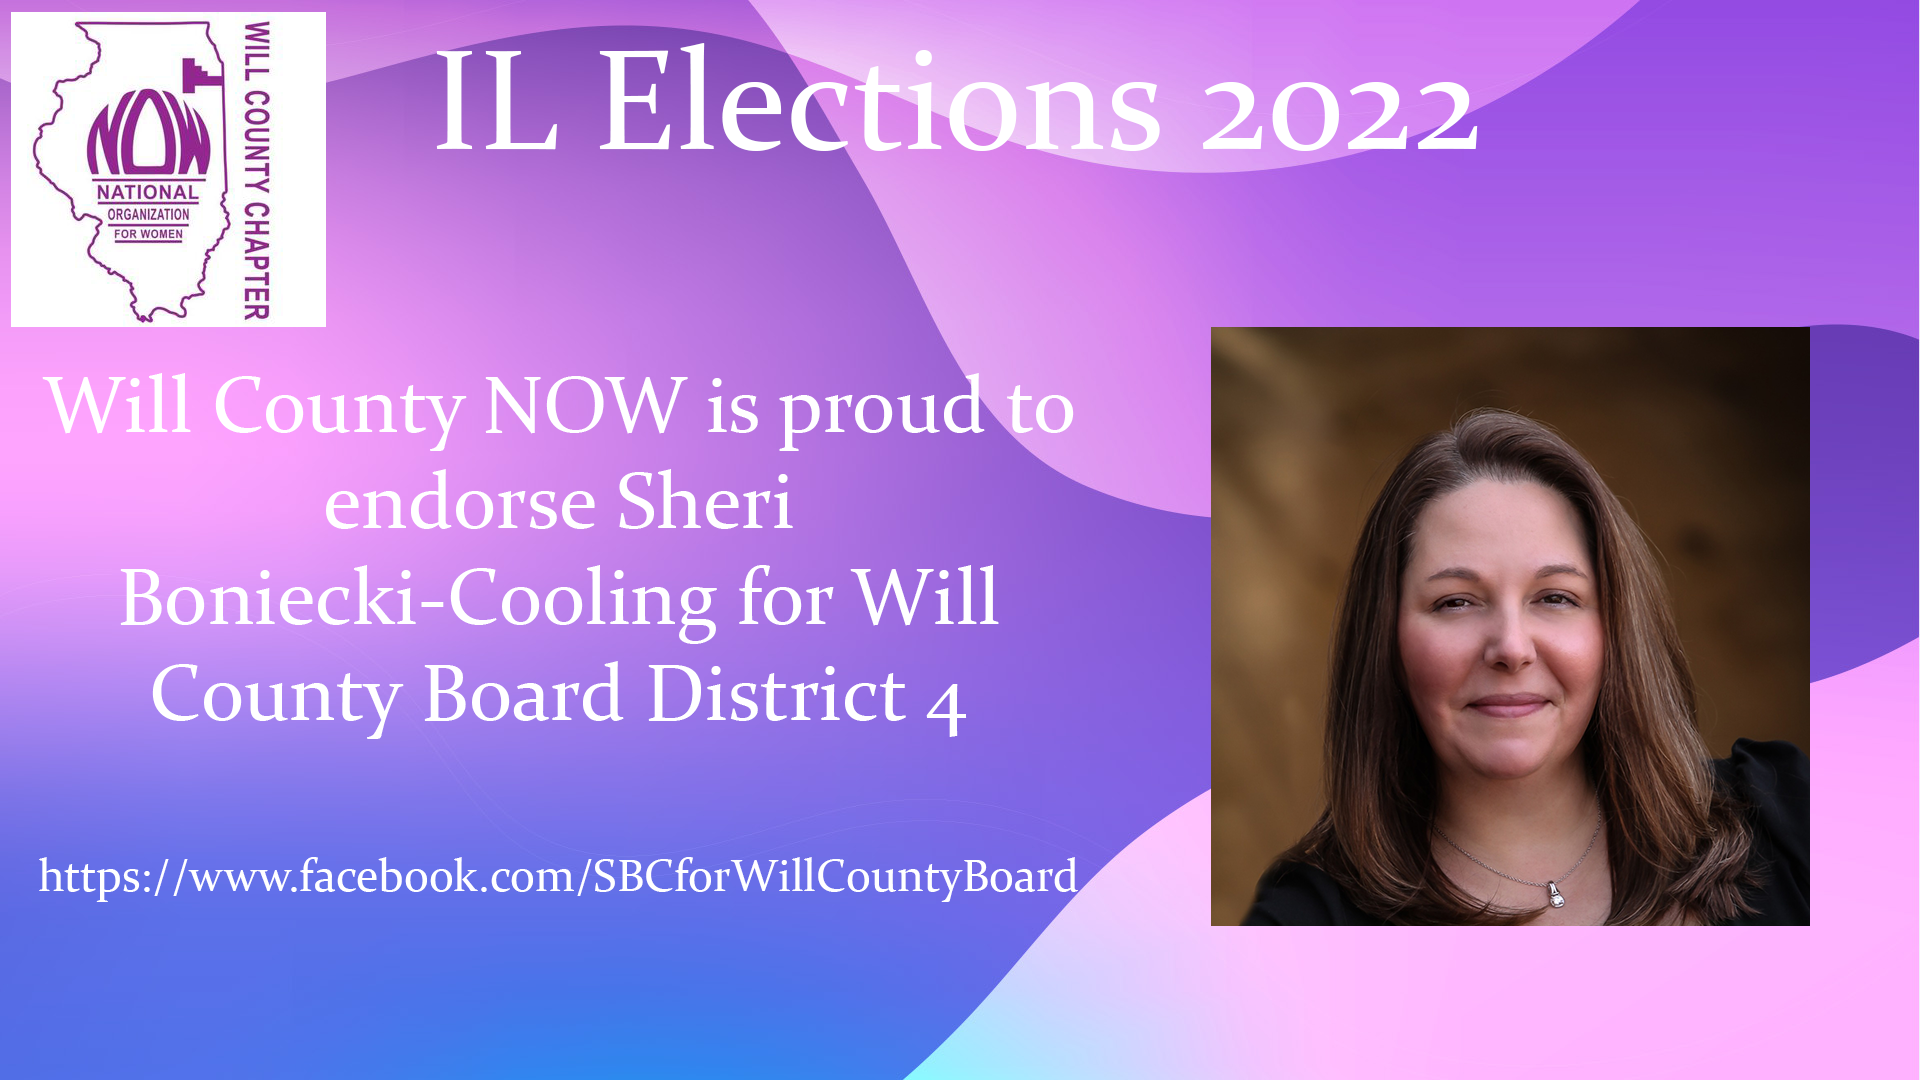 Will County NOW Endorses Sheri Boniecki-Cooling for Will County Board District 4